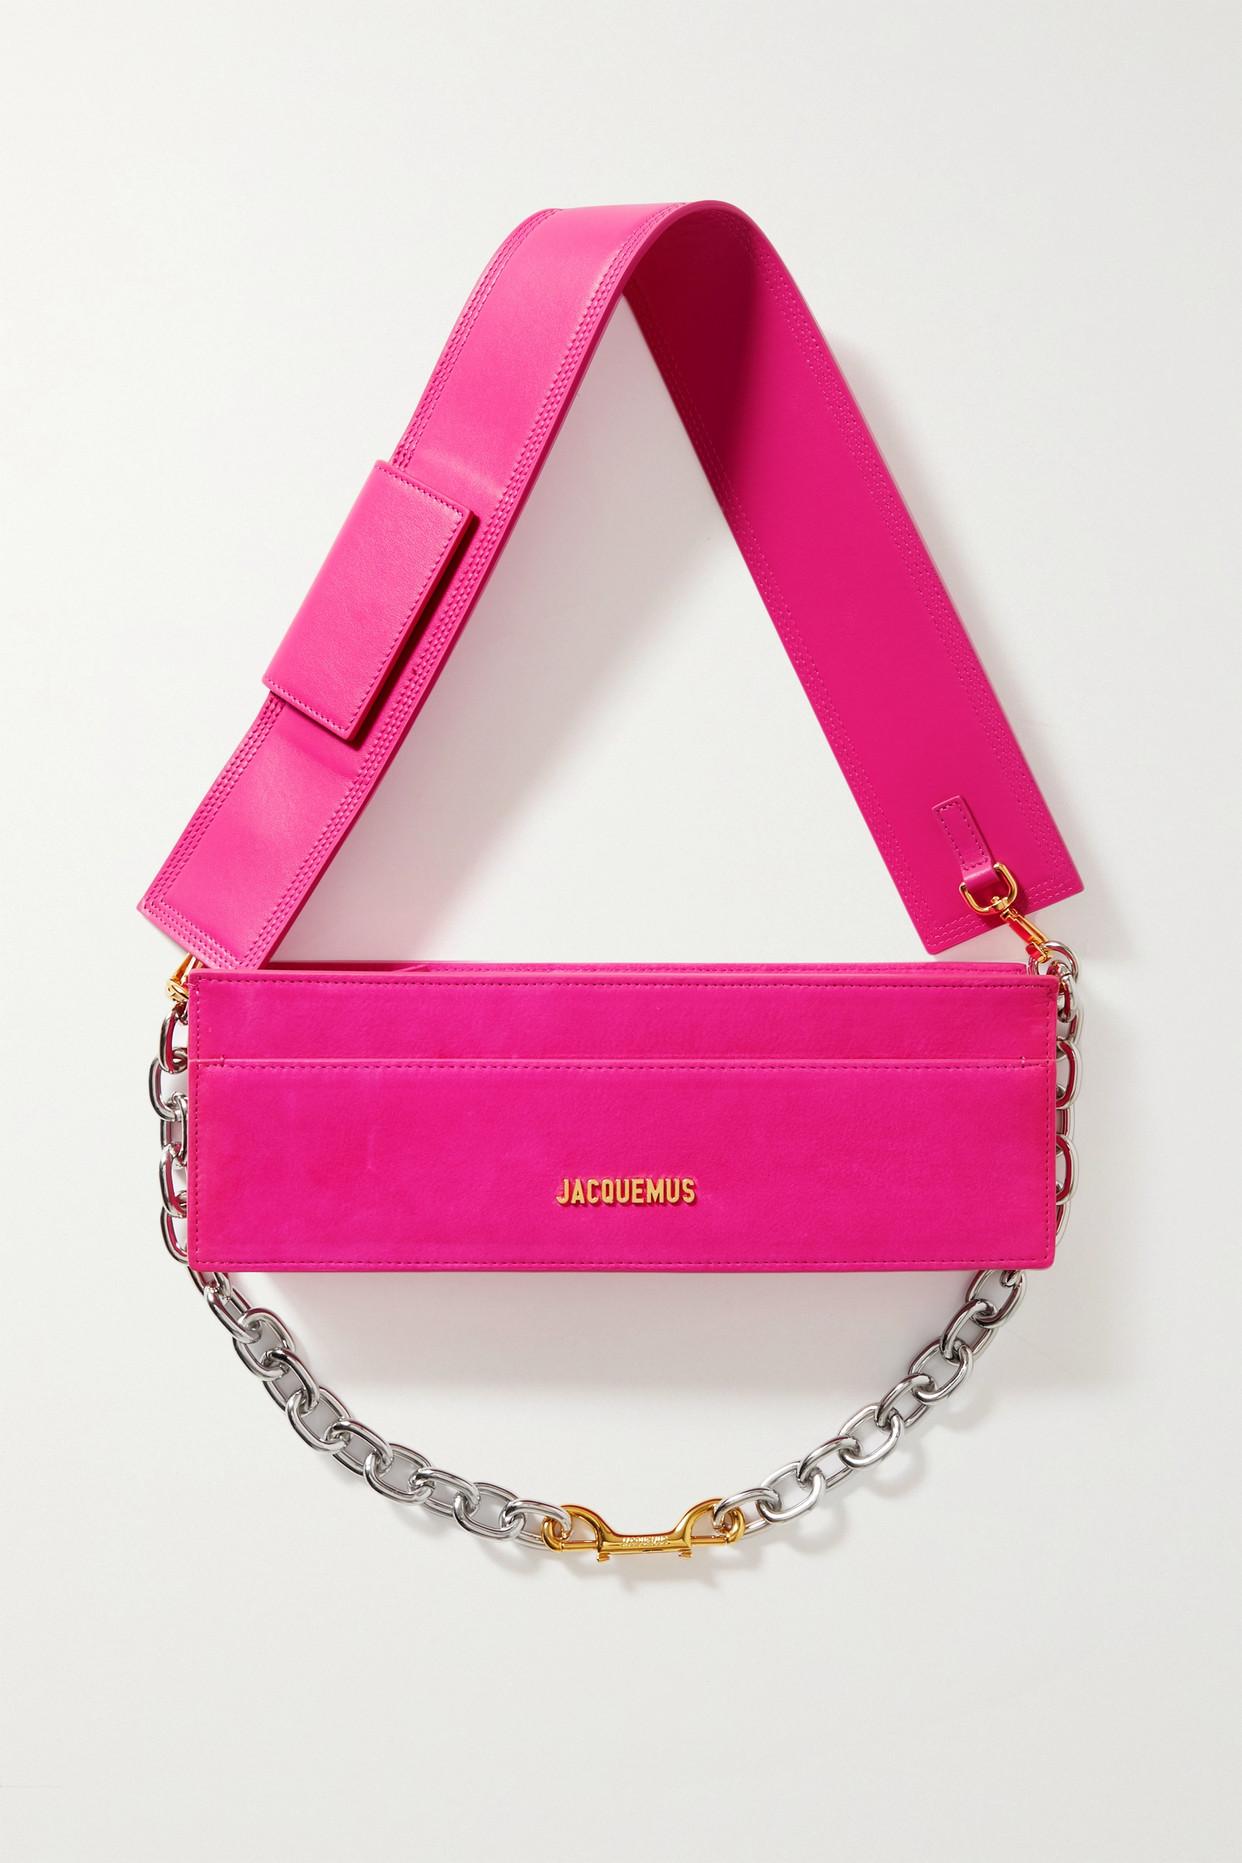 Jacquemus Le Ciuciu Leather And Suede Shoulder Bag in Pink | Lyst